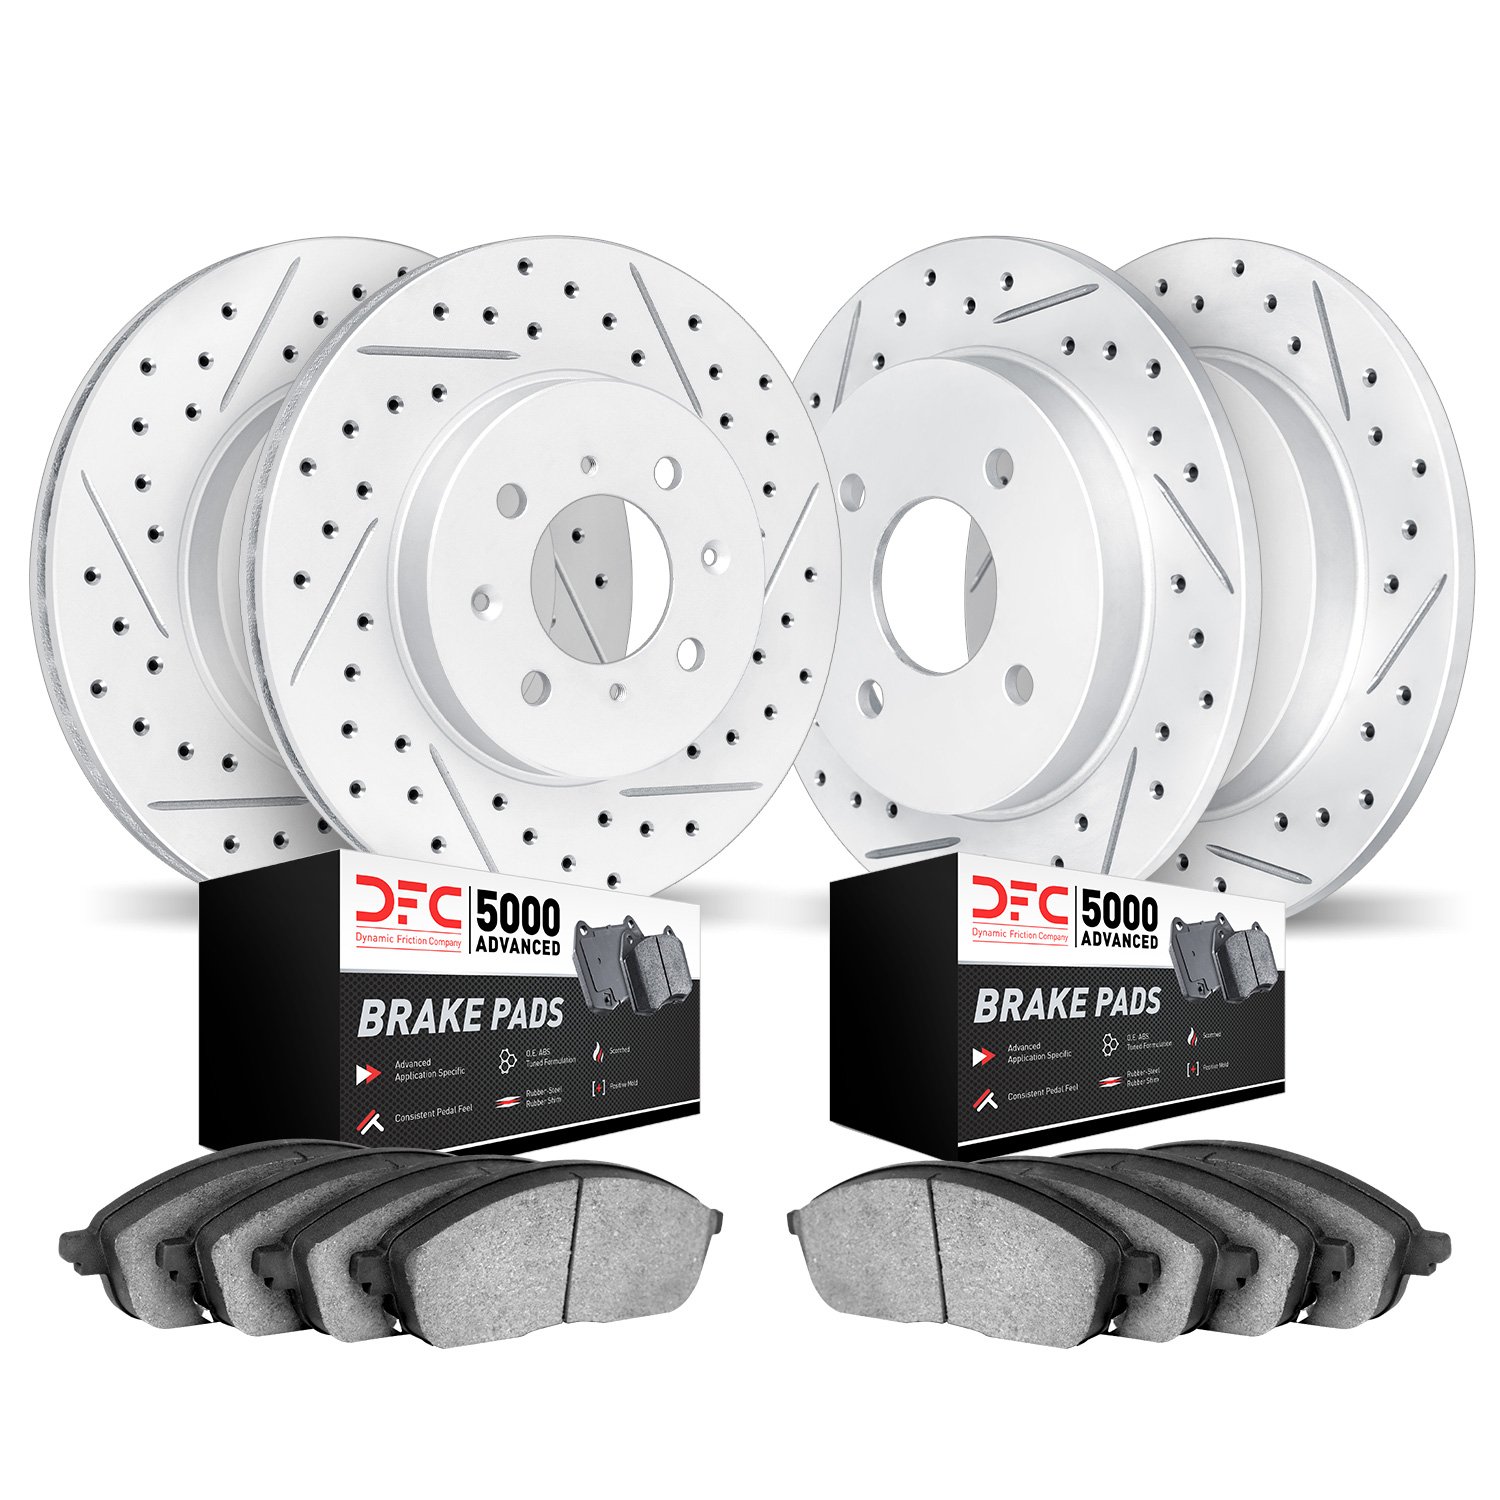 2504-01001 Geoperformance Drilled/Slotted Rotors w/5000 Advanced Brake Pads Kit, 2007-2010 Multiple Makes/Models, Position: Fron